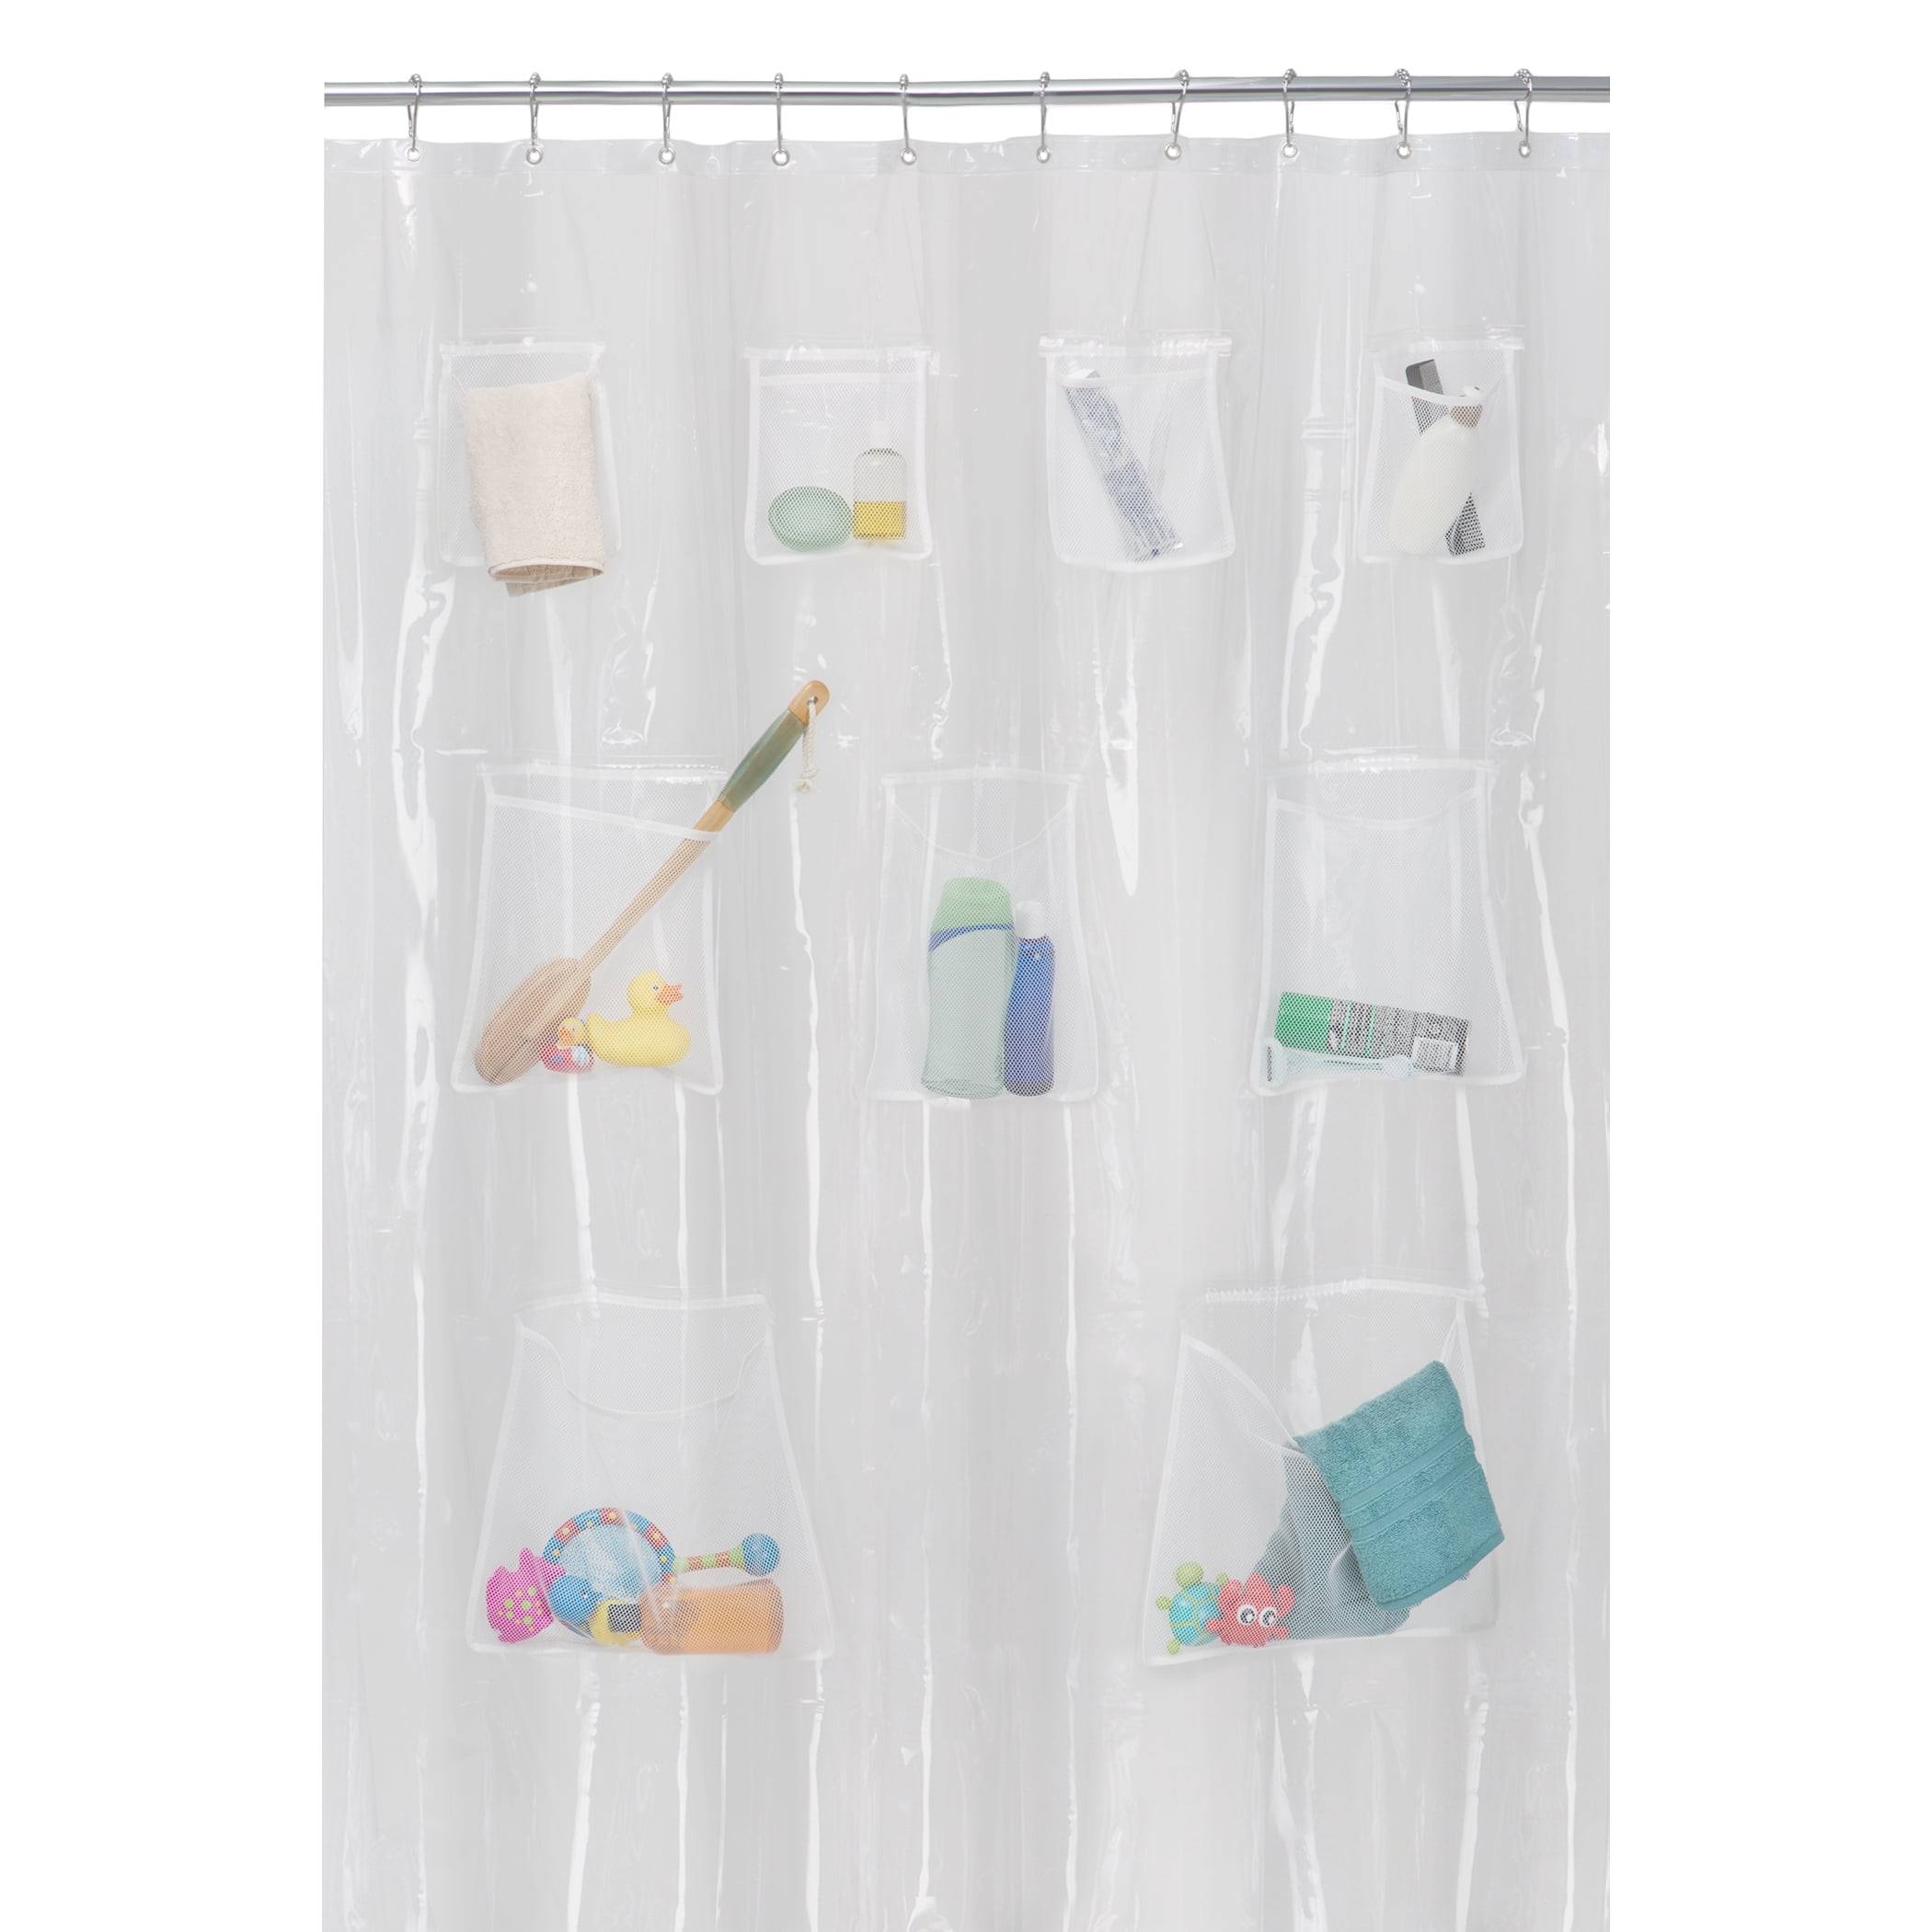 Shower Curtain With Pockets